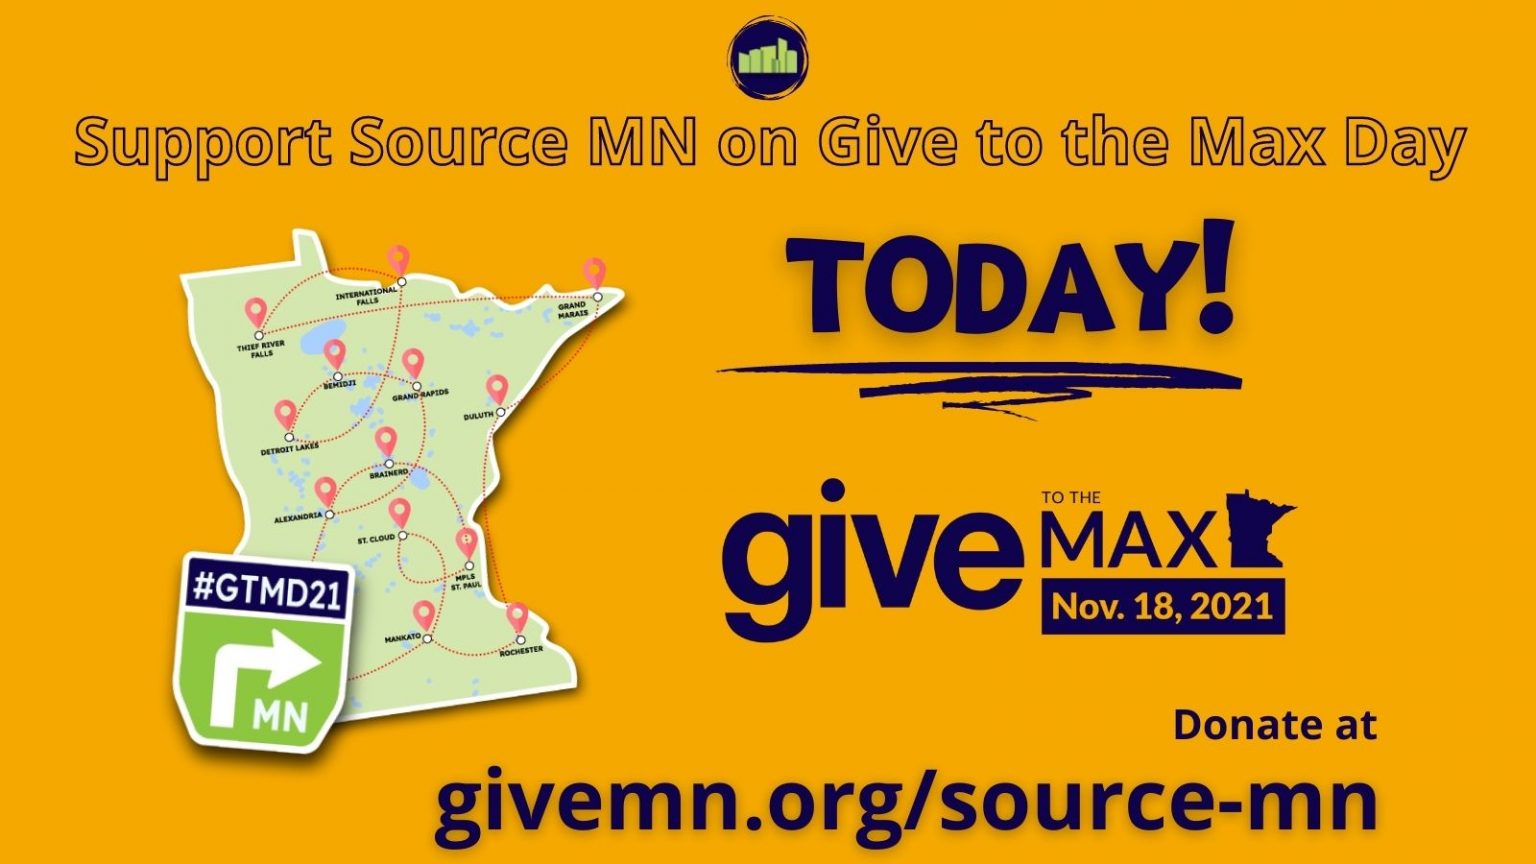 Give to the Max Day Source MN, Inc.